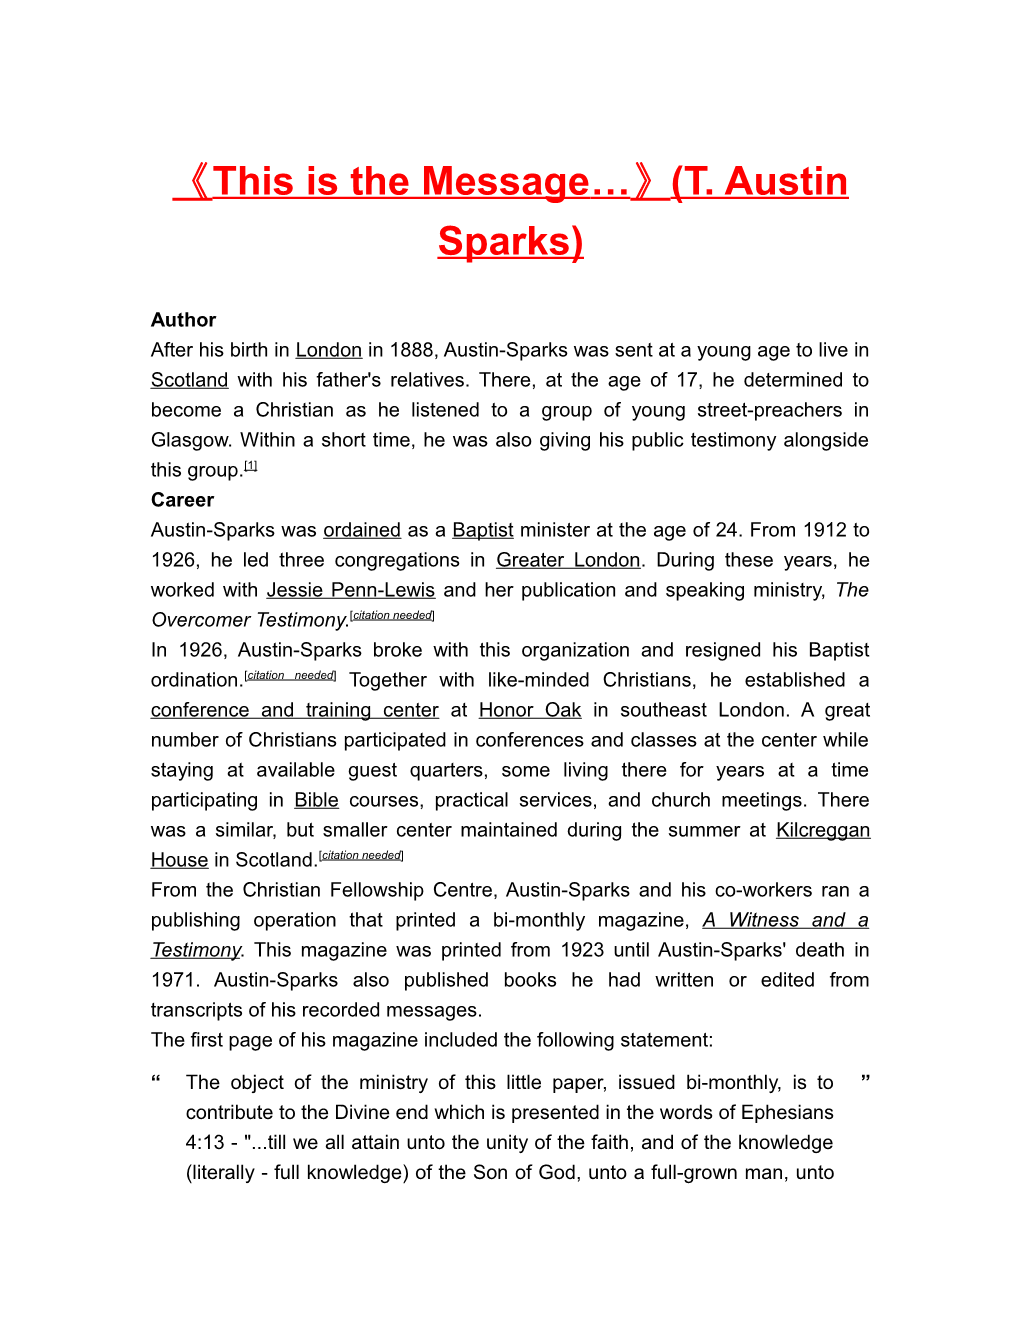 This Is the Message (T. Austin Sparks)